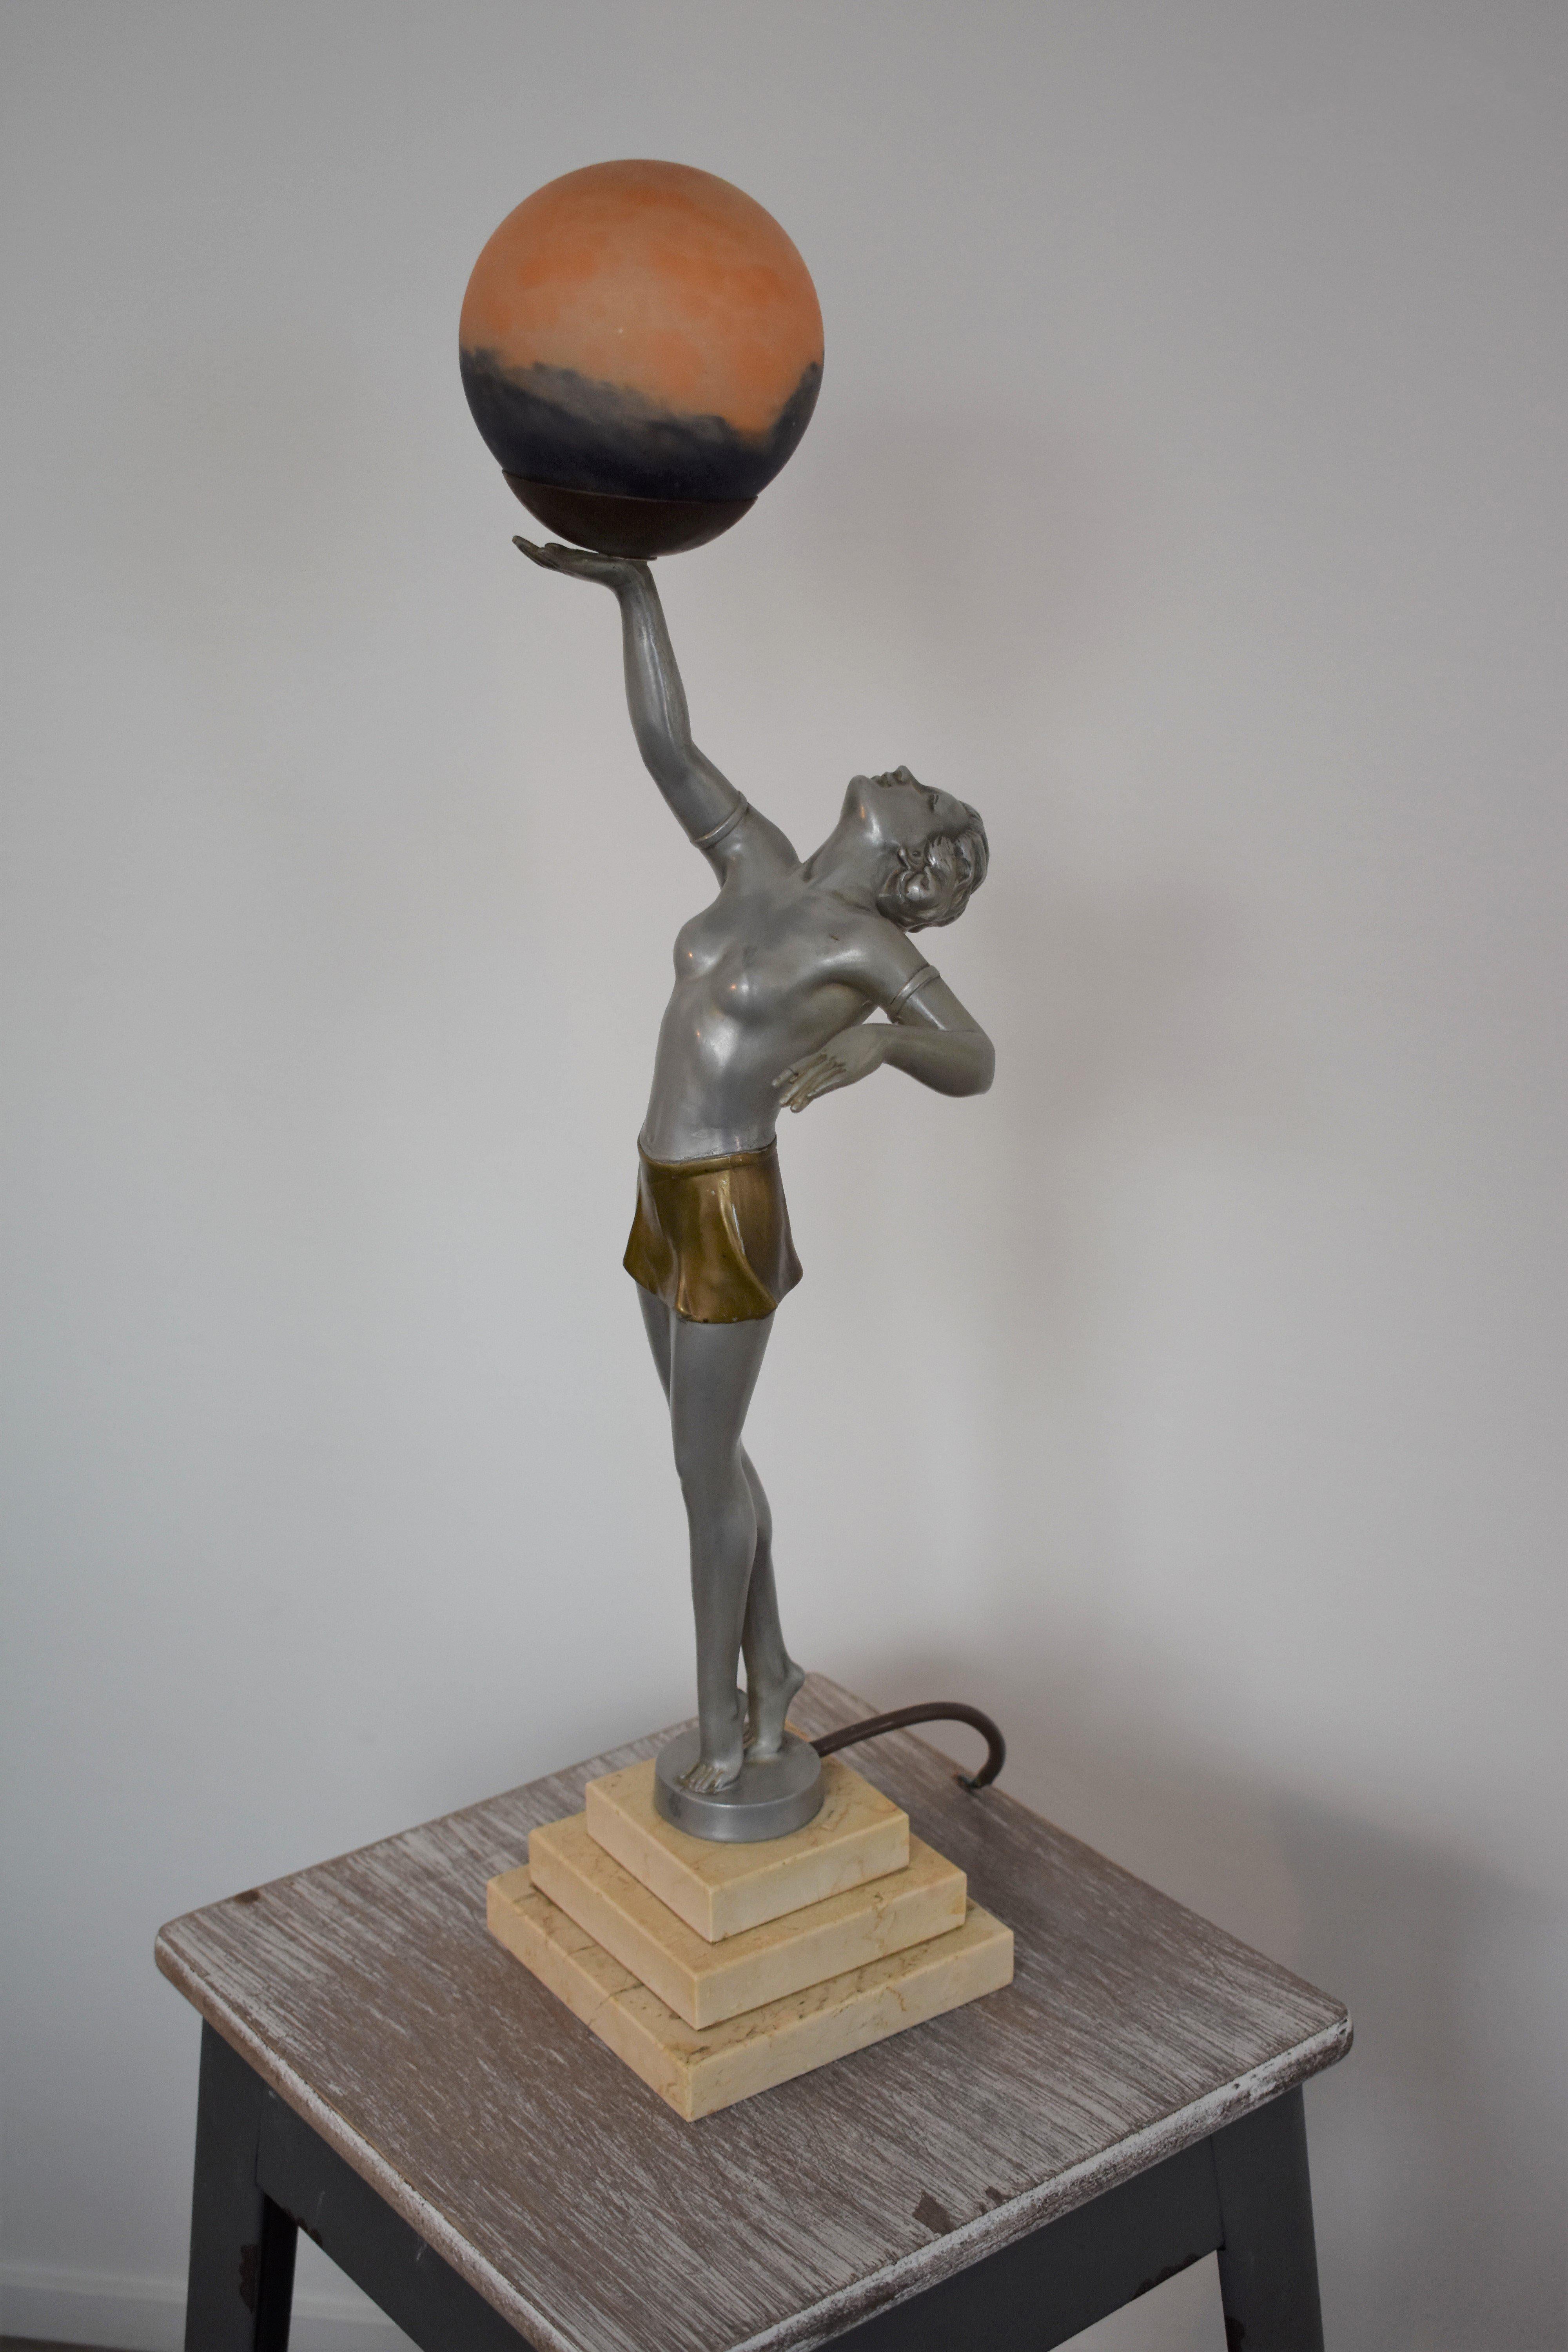 Information:
This original art deco piece features a nude woman holding a glass globe over her head. The globe lights up when turned on. The lamp is in the style of the famous Max le Verrier lamps. However it is most likely made by Enrique Molins